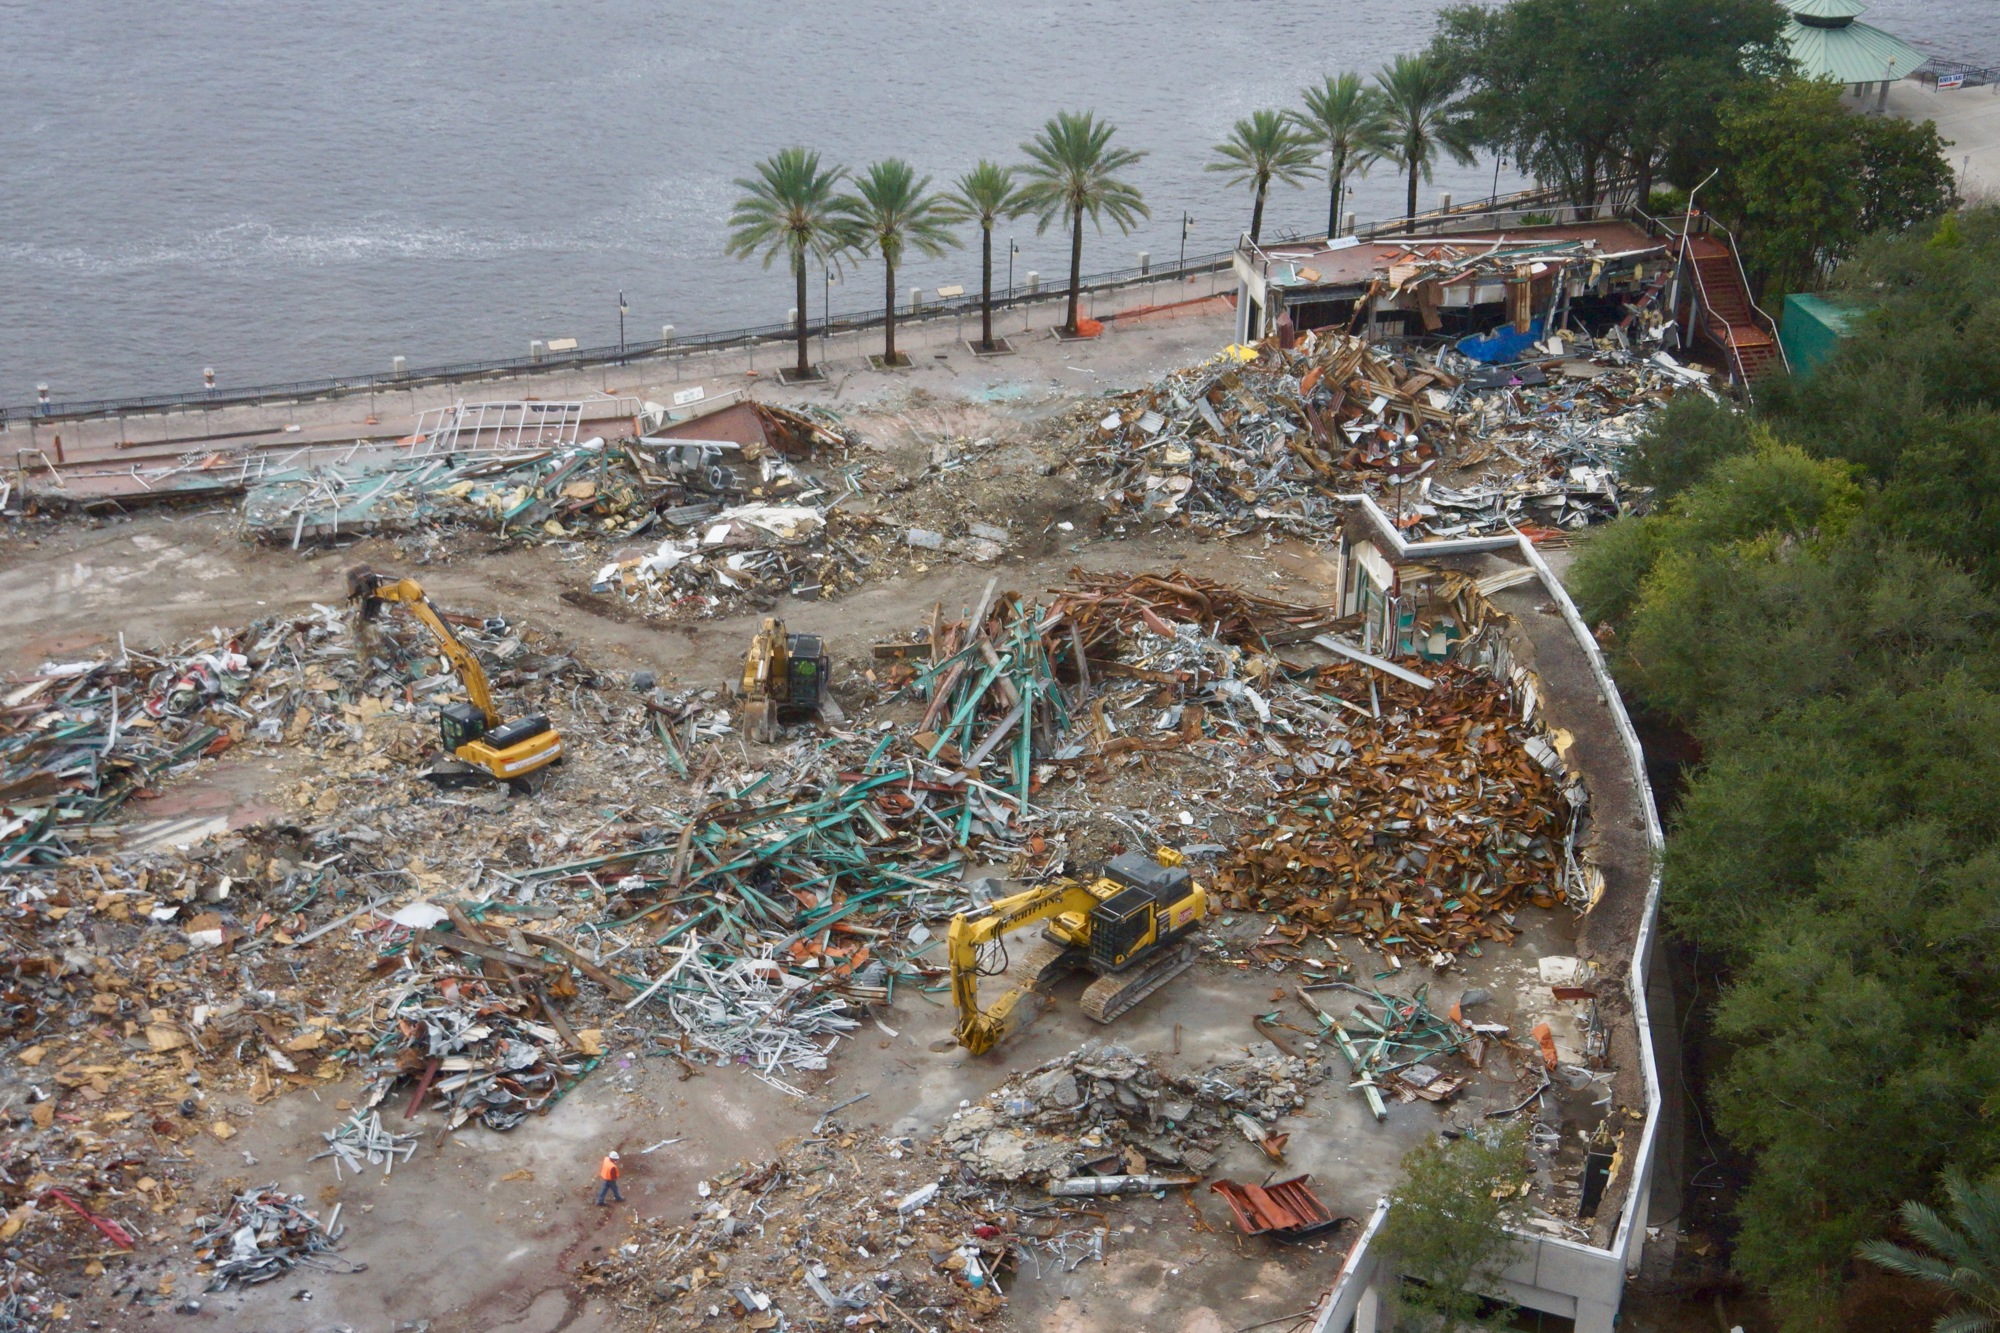 The western part of the building, which previously housed Hooters restaurant, was demolished by Dec. 30.